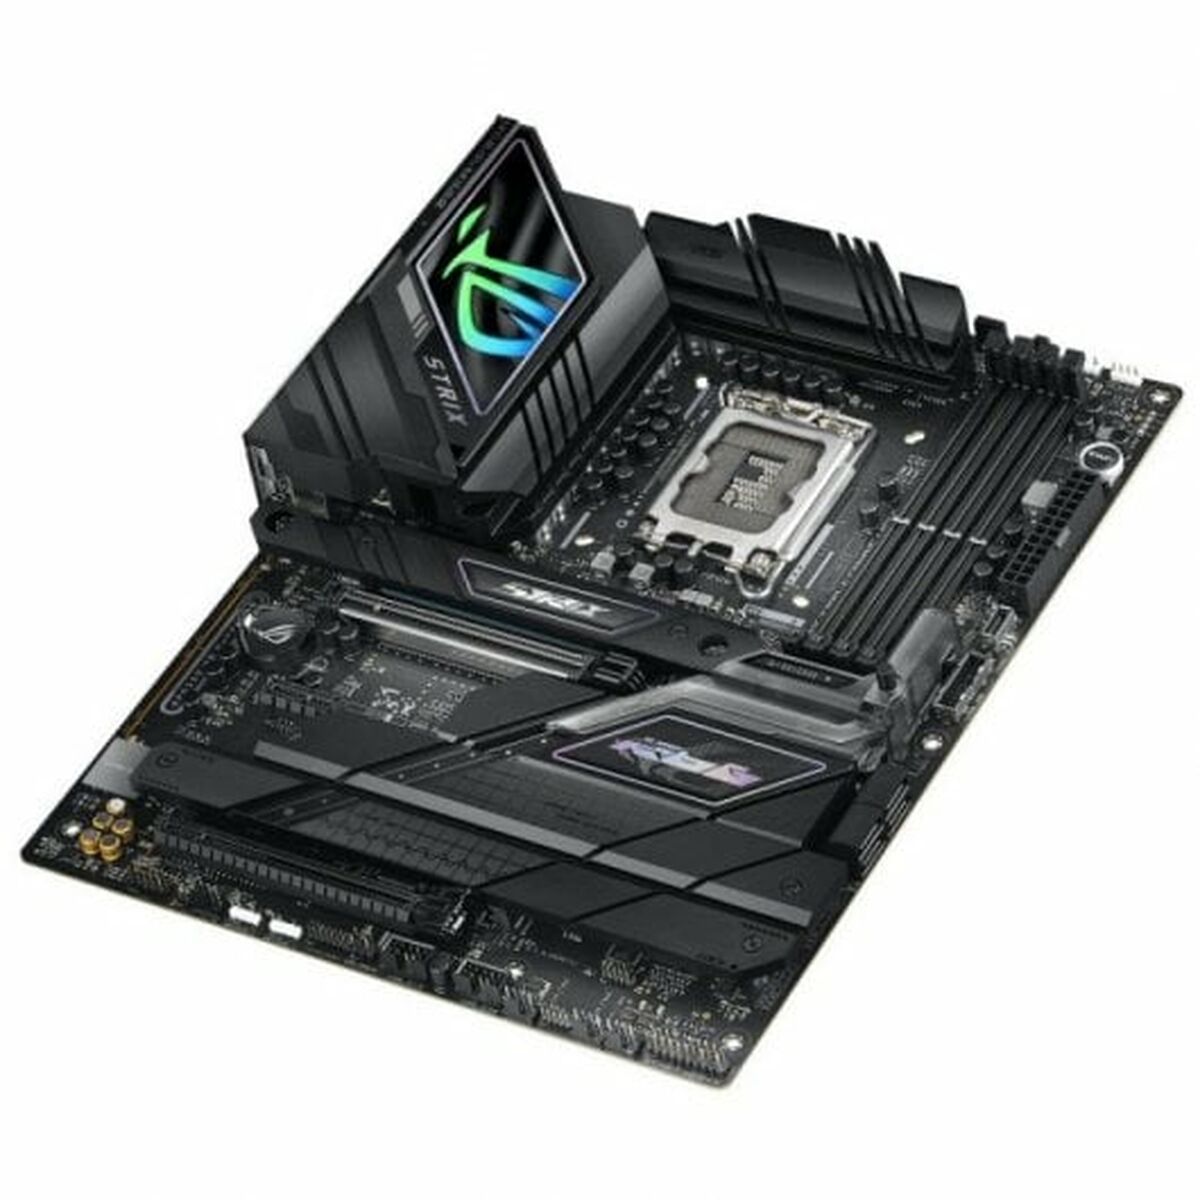 Motherboard Asus ROG STRIX Z790-F GAMING LGA 1700 Intel Z790 Express, Asus, Computing, Components, motherboard-asus-rog-strix-z790-f-gaming-lga-1700-intel-z790-express, black friday / cyber monday, Brand_Asus, category-reference-2609, category-reference-2803, category-reference-2804, category-reference-t-19685, category-reference-t-19912, category-reference-t-21360, category-reference-t-25660, computers / components, Condition_NEW, Price_400 - 500, Teleworking, RiotNook